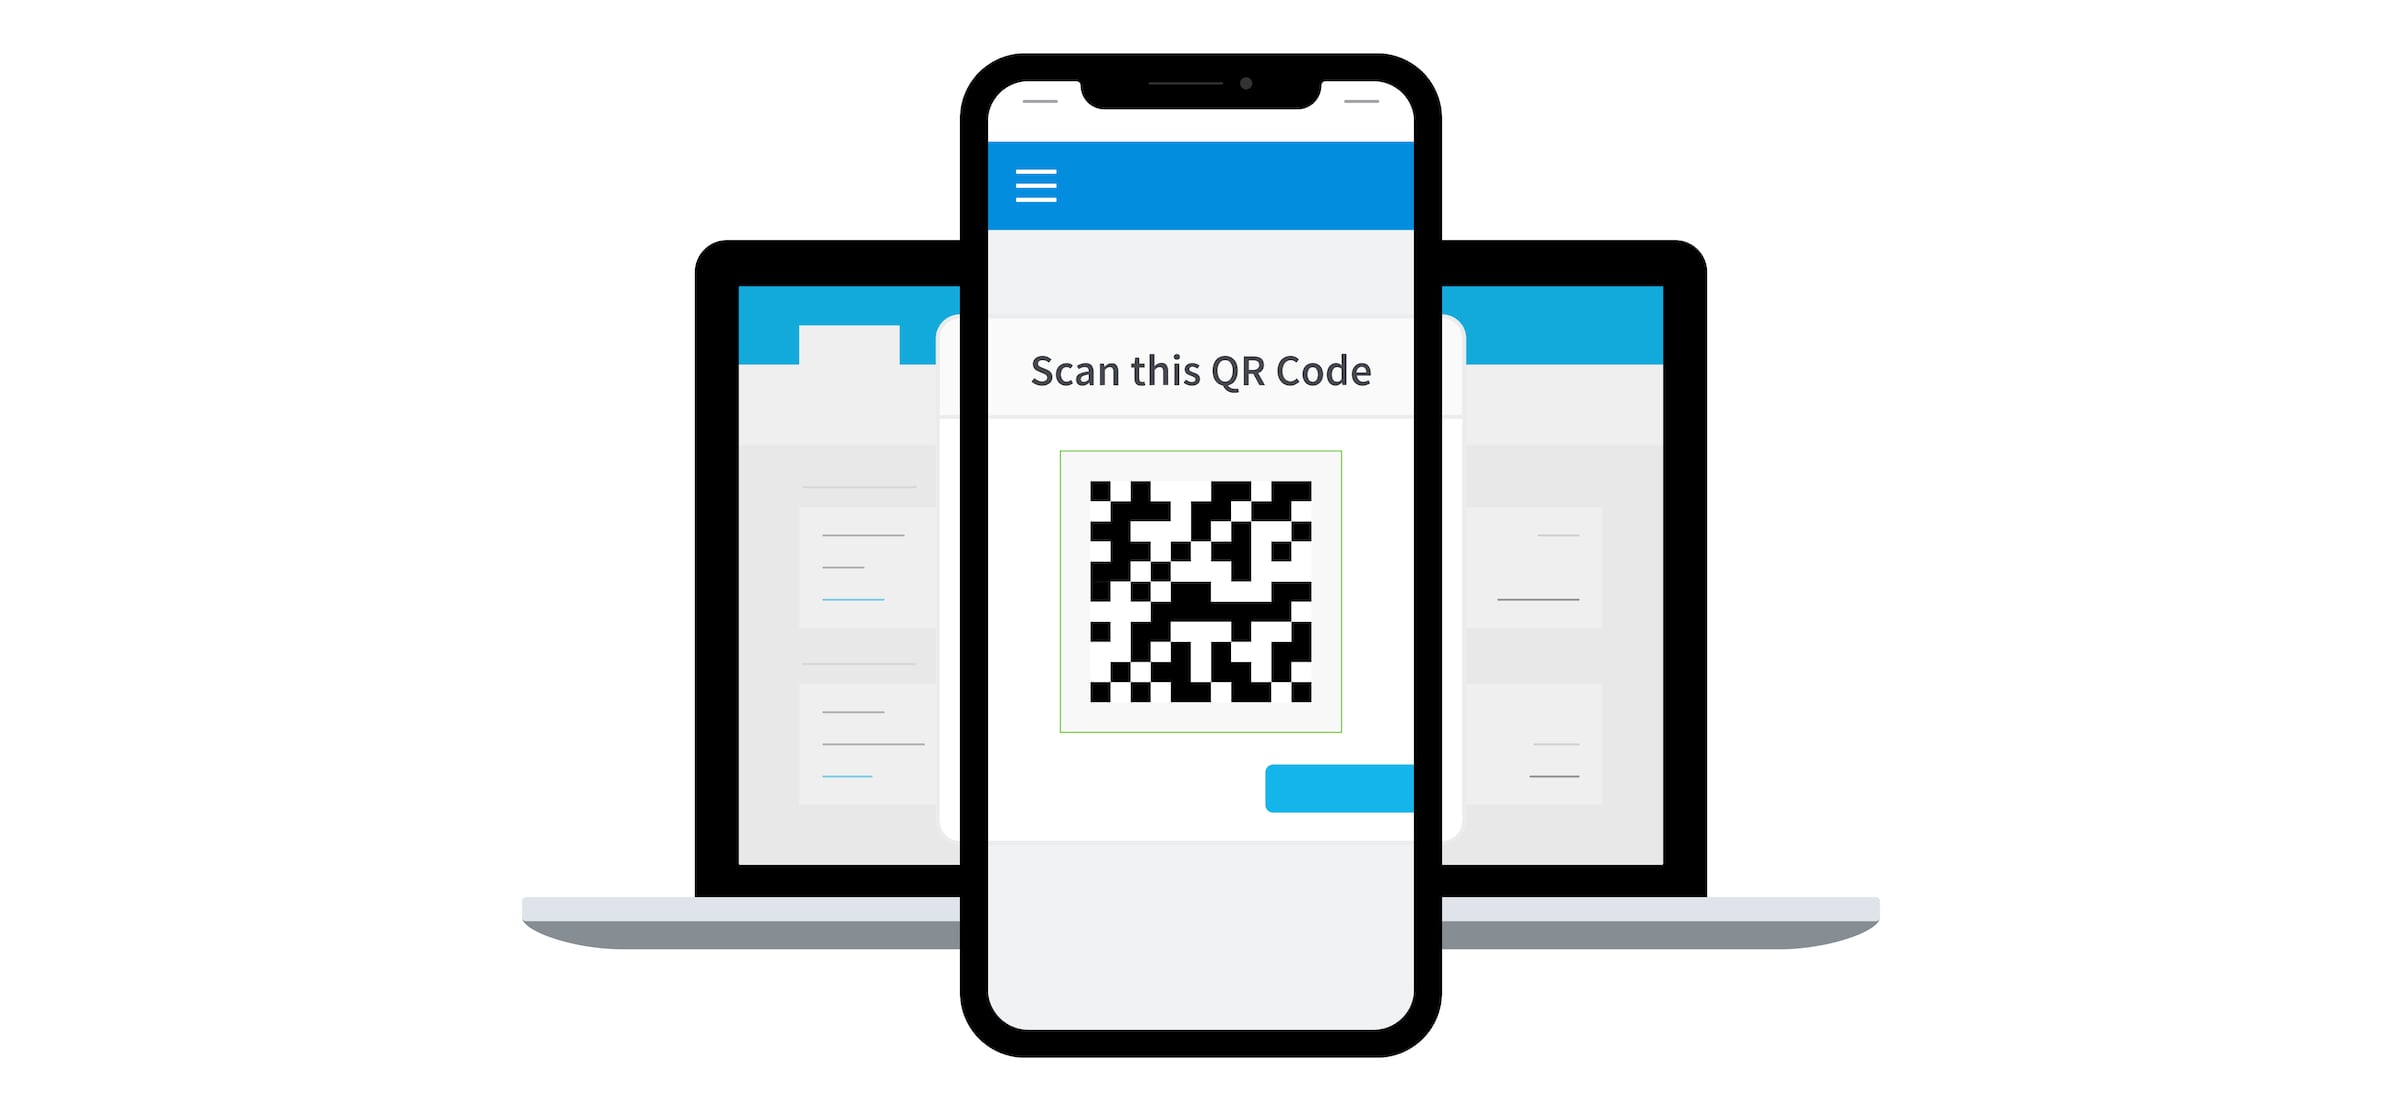 A mobile phone displays a QR code and a message saying ‘Scan this QR Code’ as part of syncing Xero Verify to your Xero login.